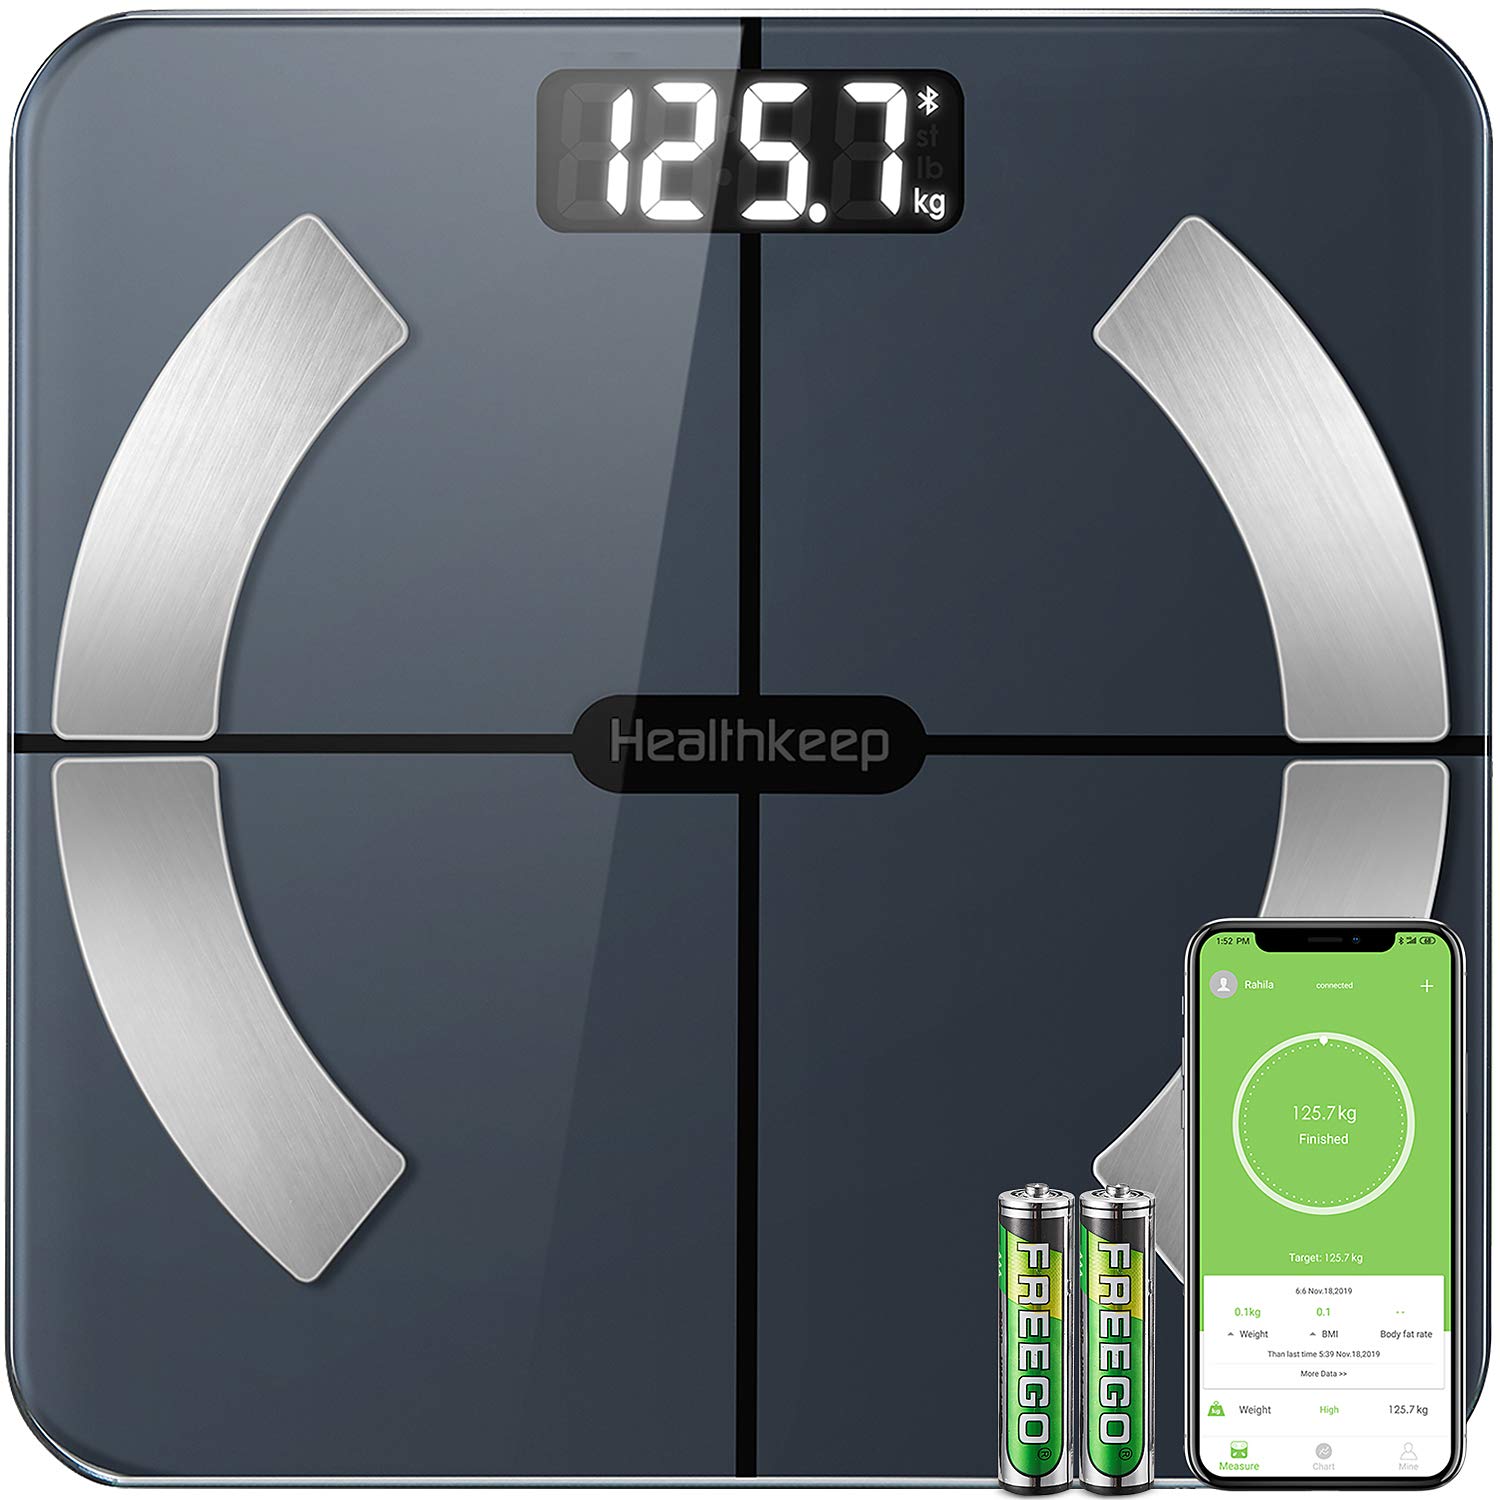 Healthkeep Scales for Body Weight